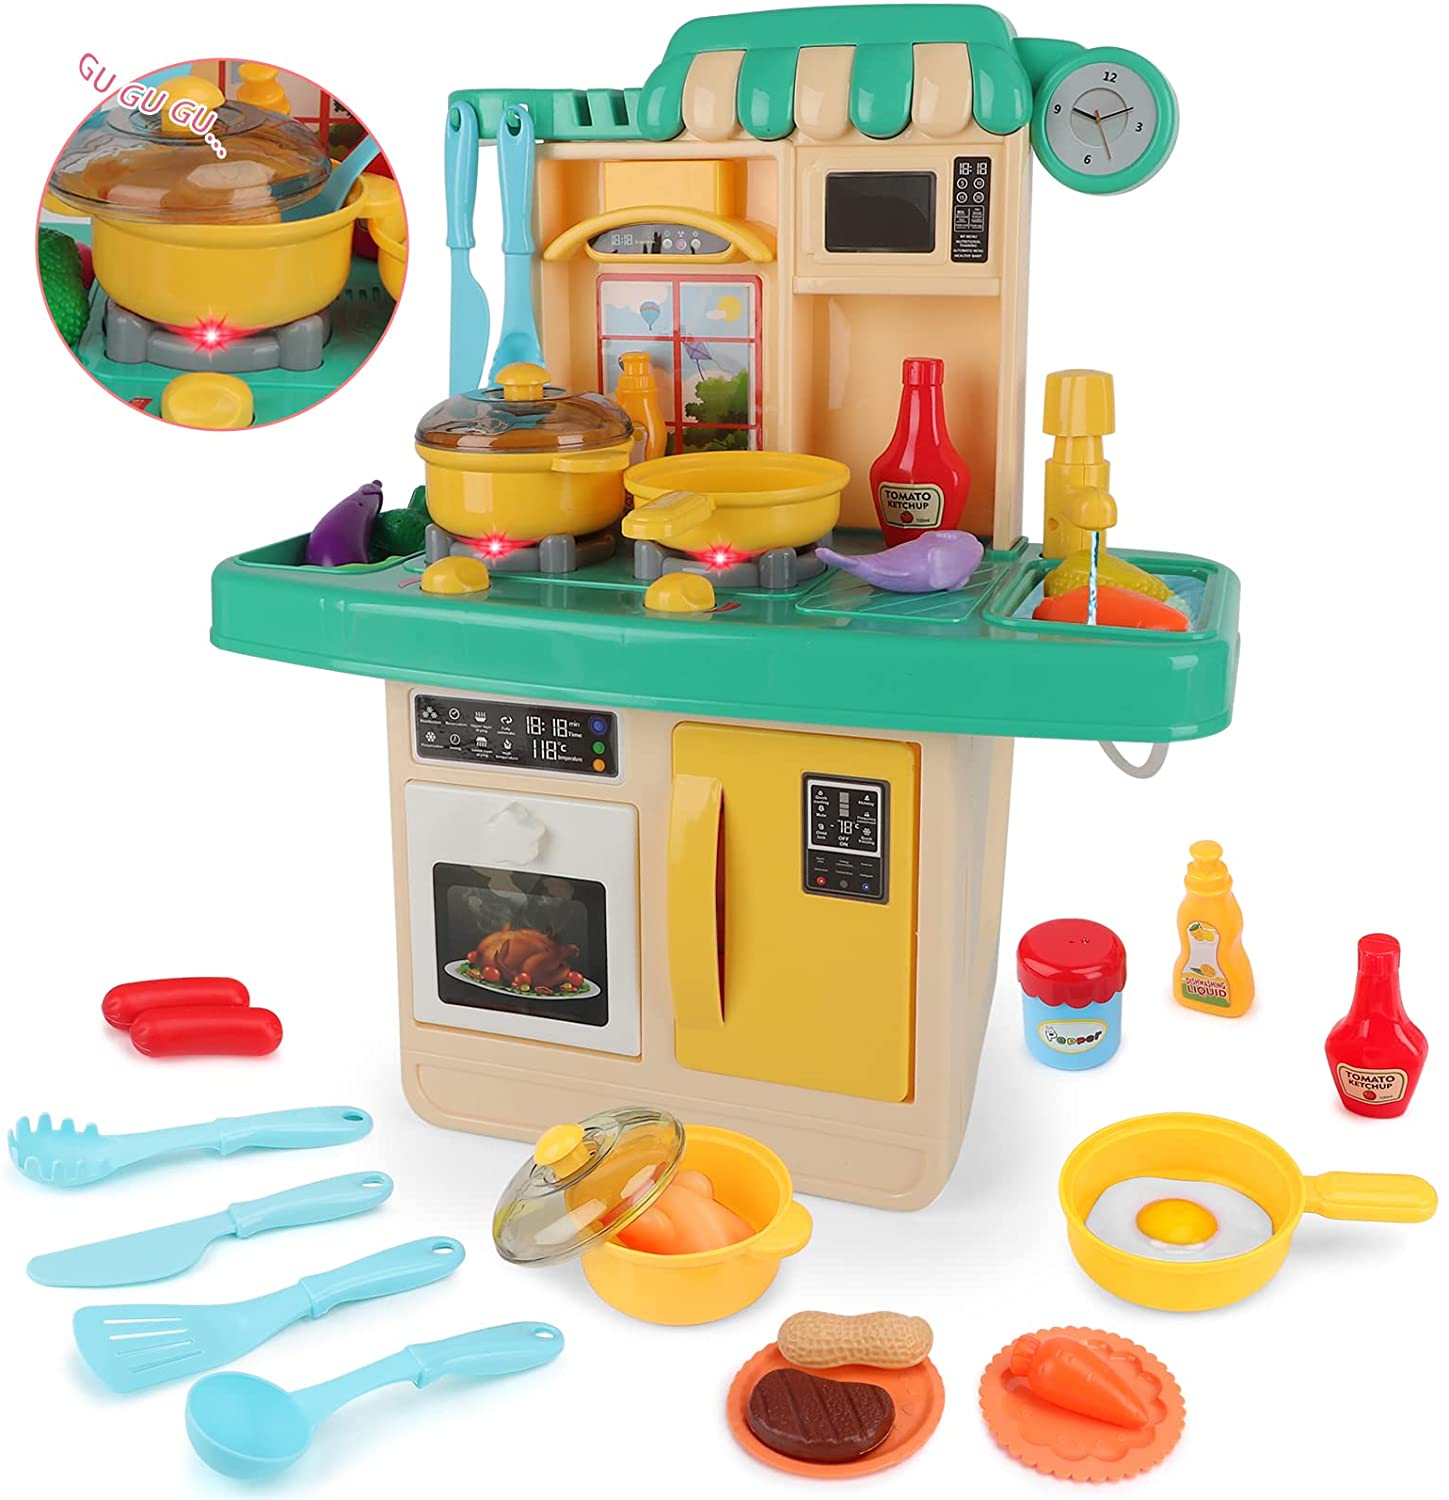 Cooking toys for boys